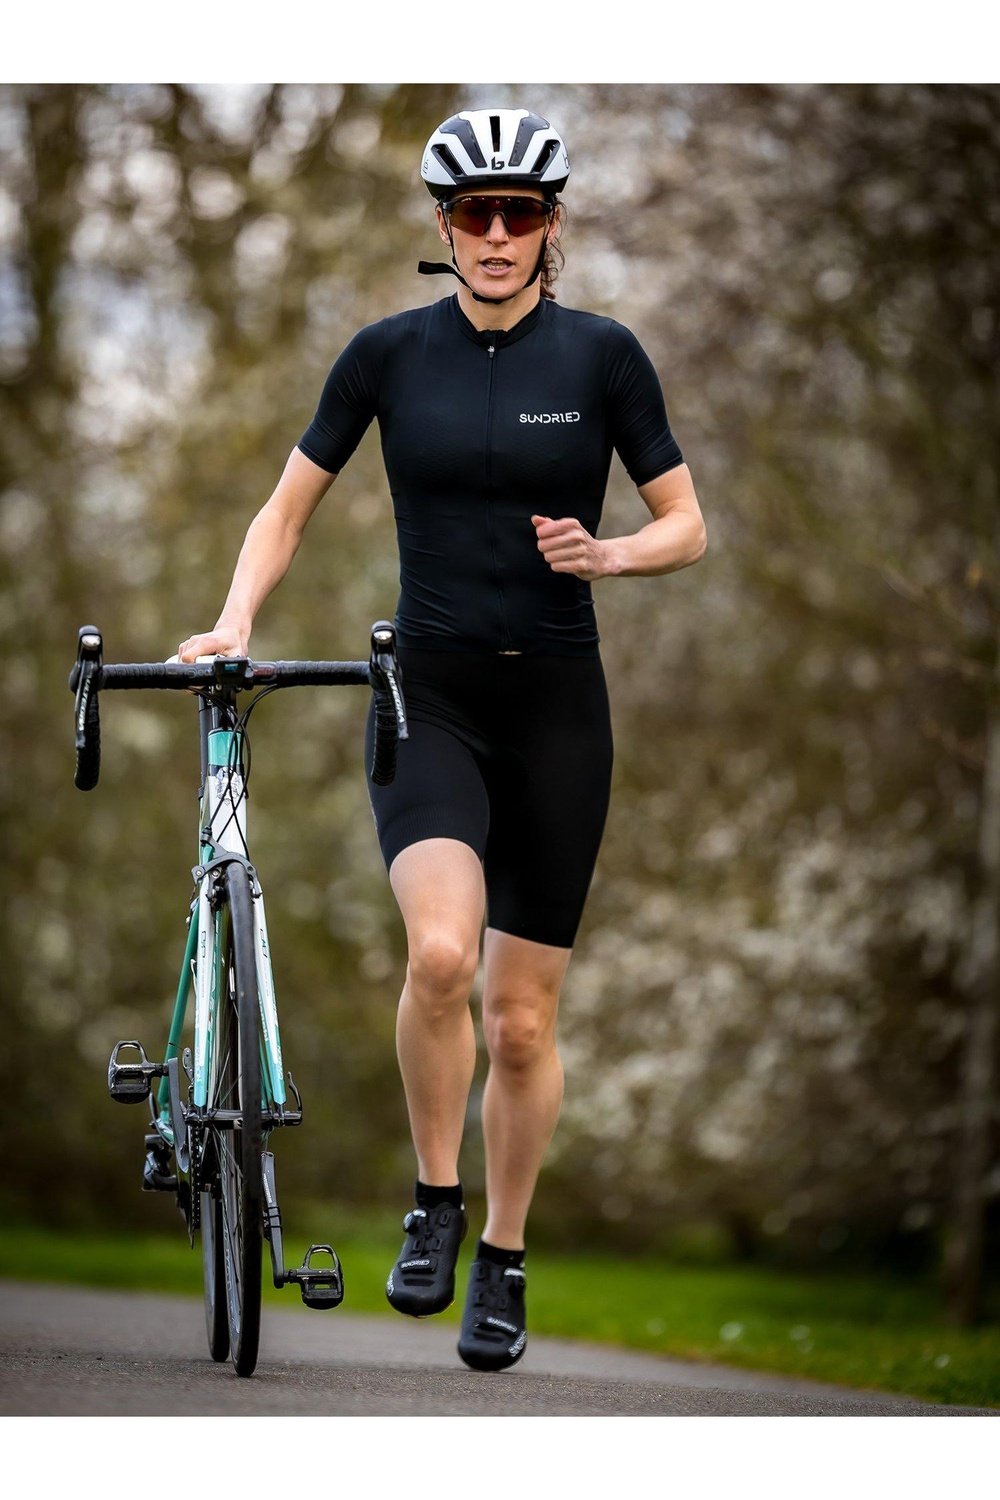 Sundried Stealth Women's Cycle Jersey Short Sleeve Jersey Activewear